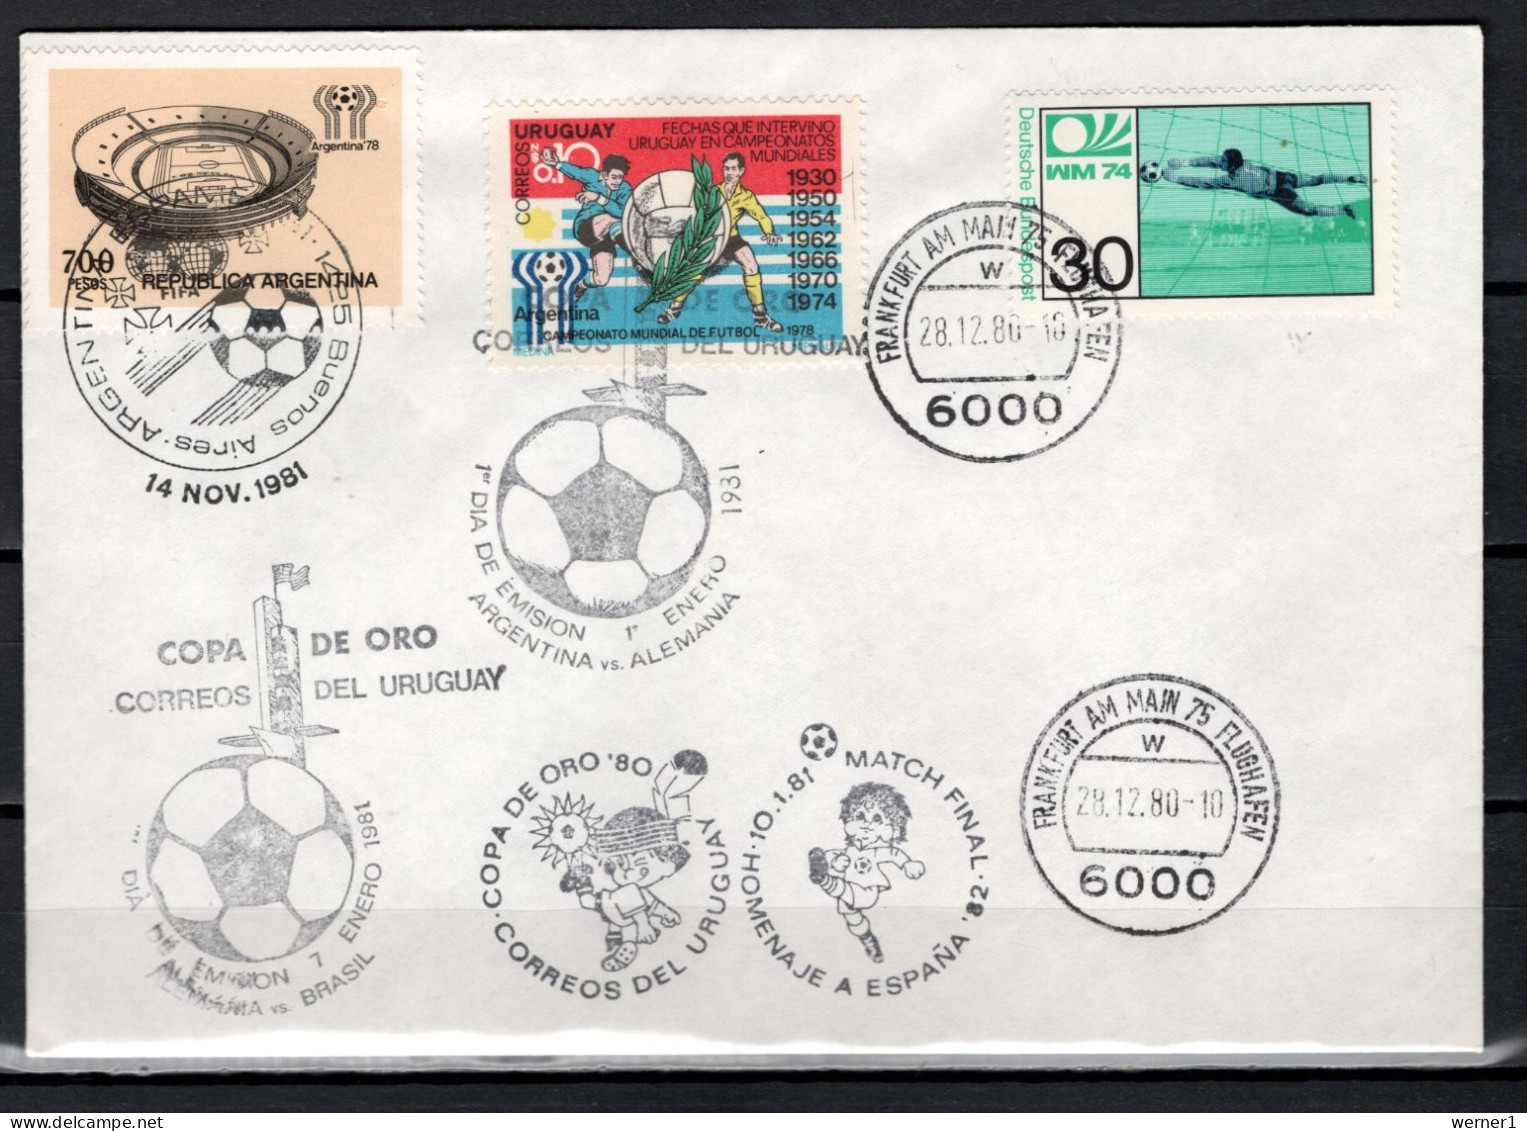 Argentina / Uruguay / Germany 1980/1981 Football Soccer World Cup Commemorative Cover - 1978 – Argentina